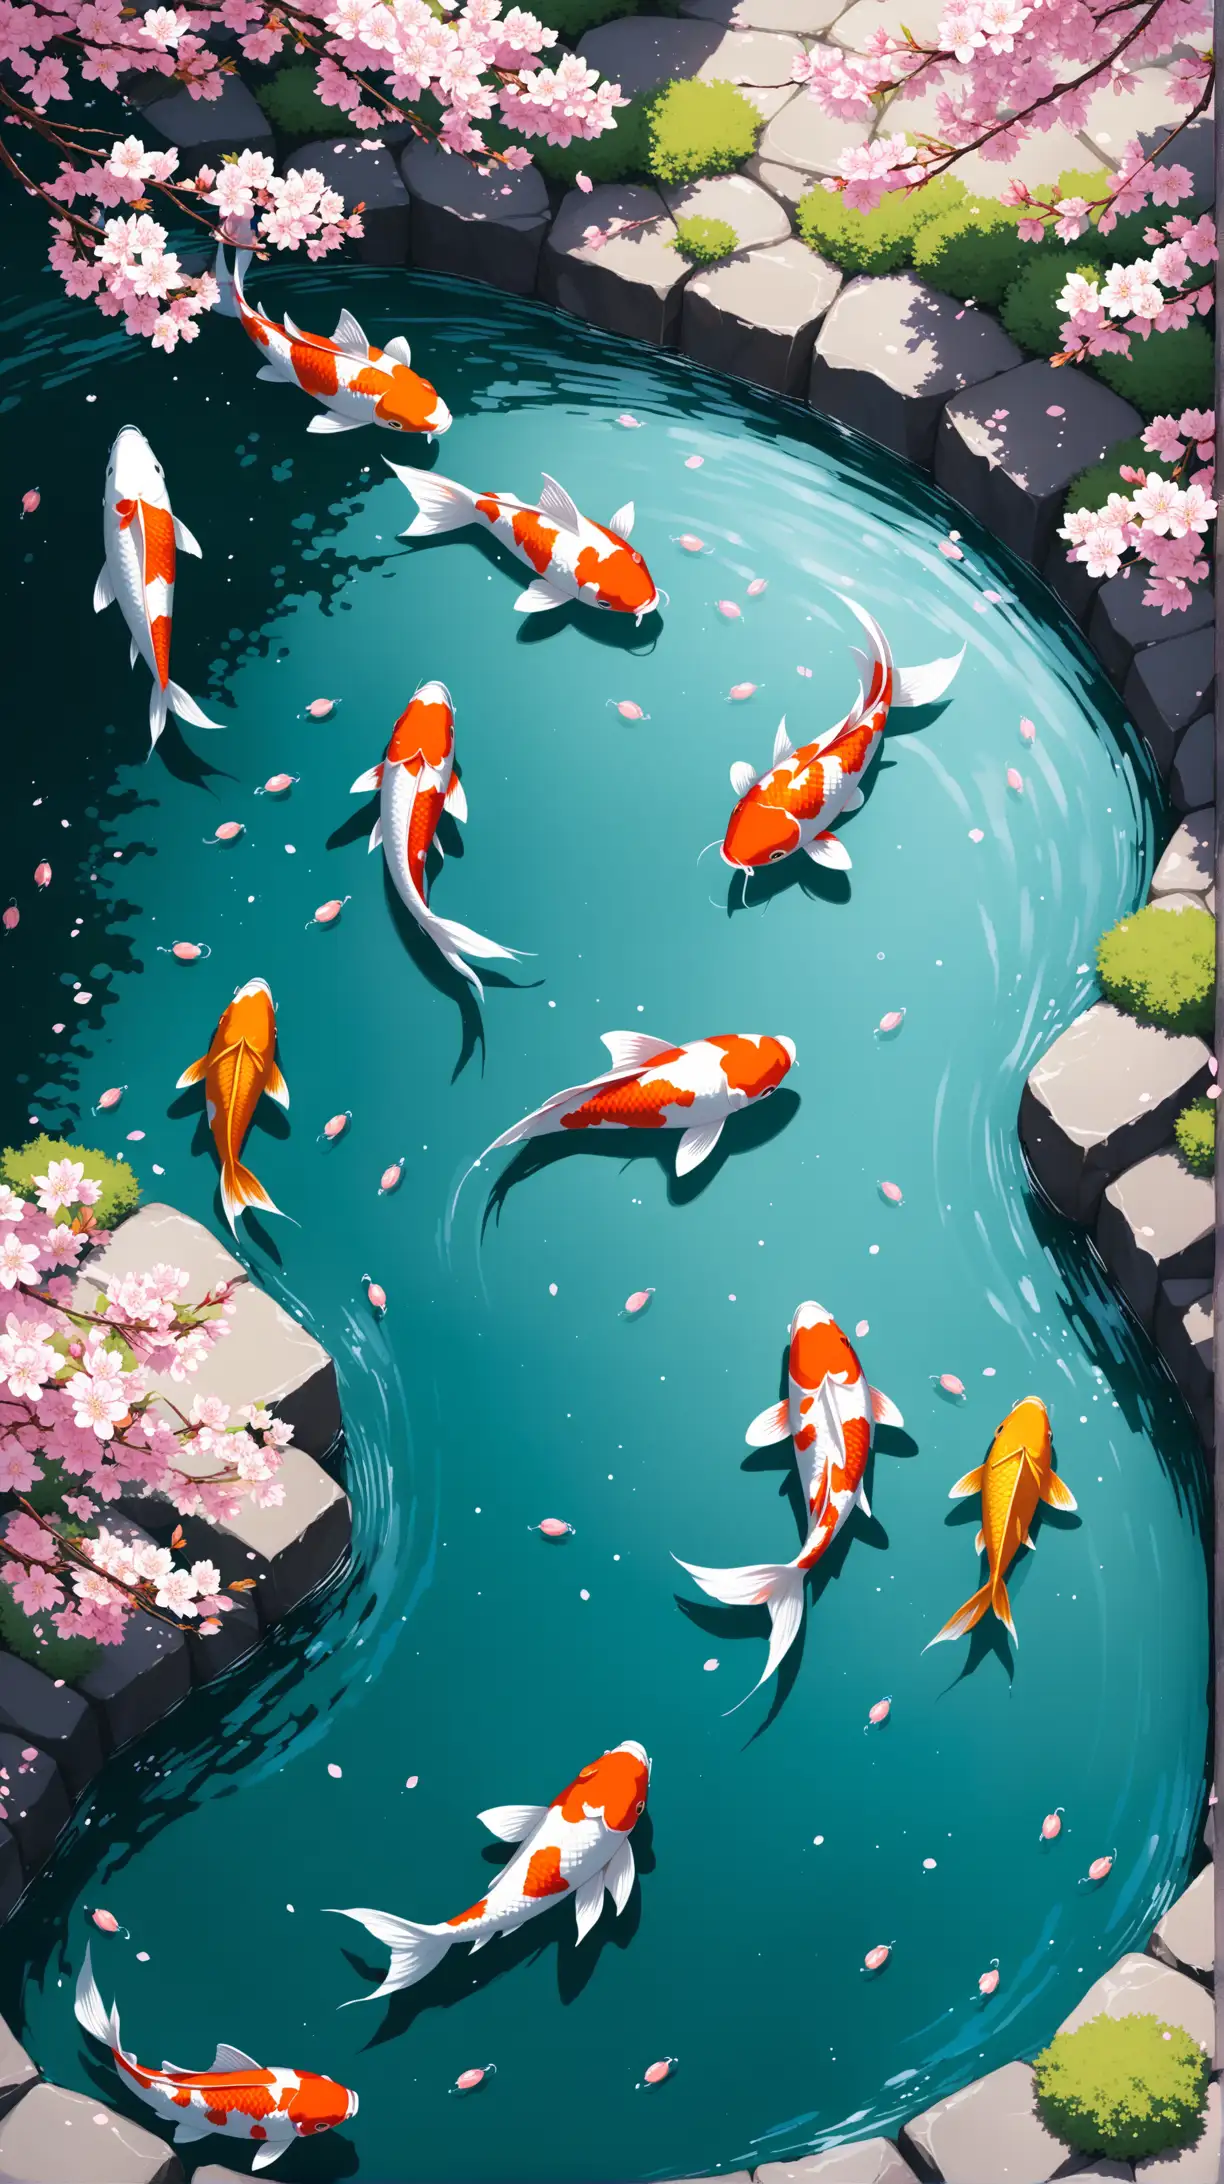 Koi fish in pond w I th falling cherry blossom in japan